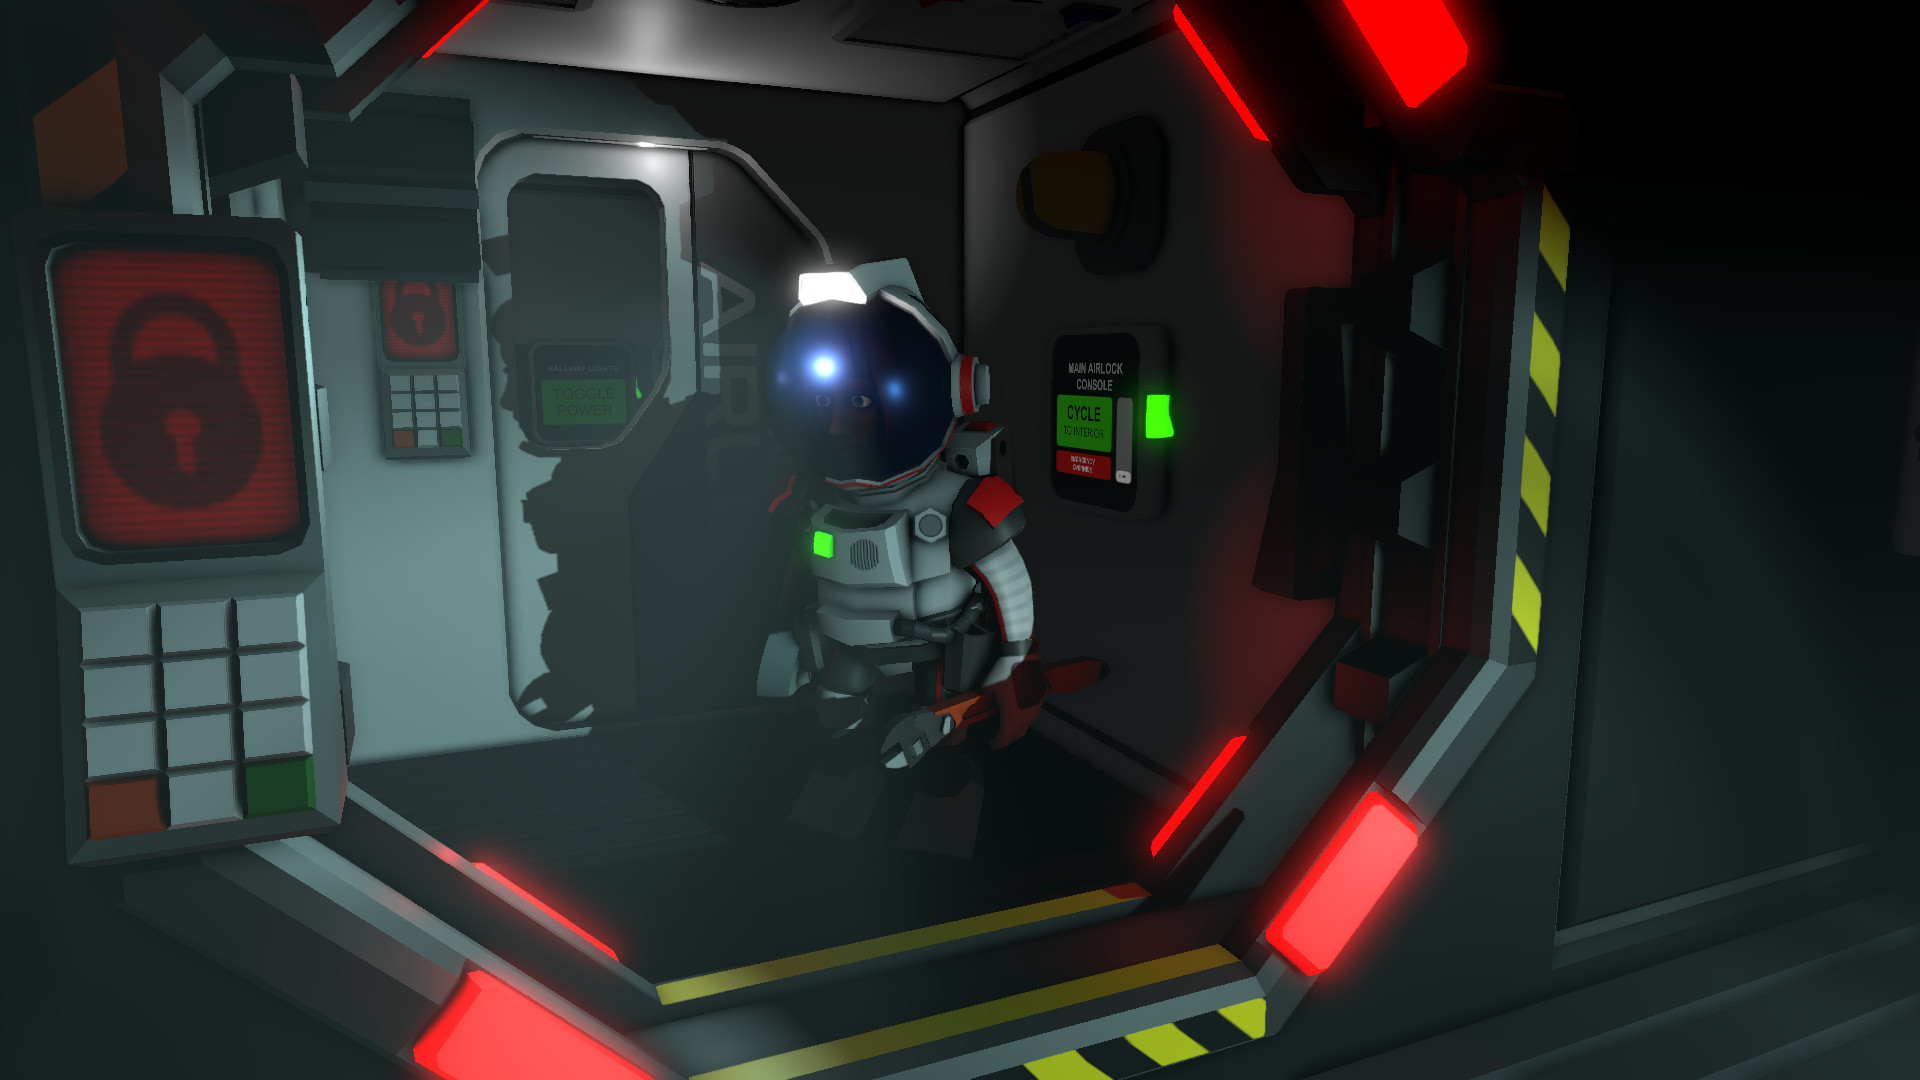 stationeers game cheap